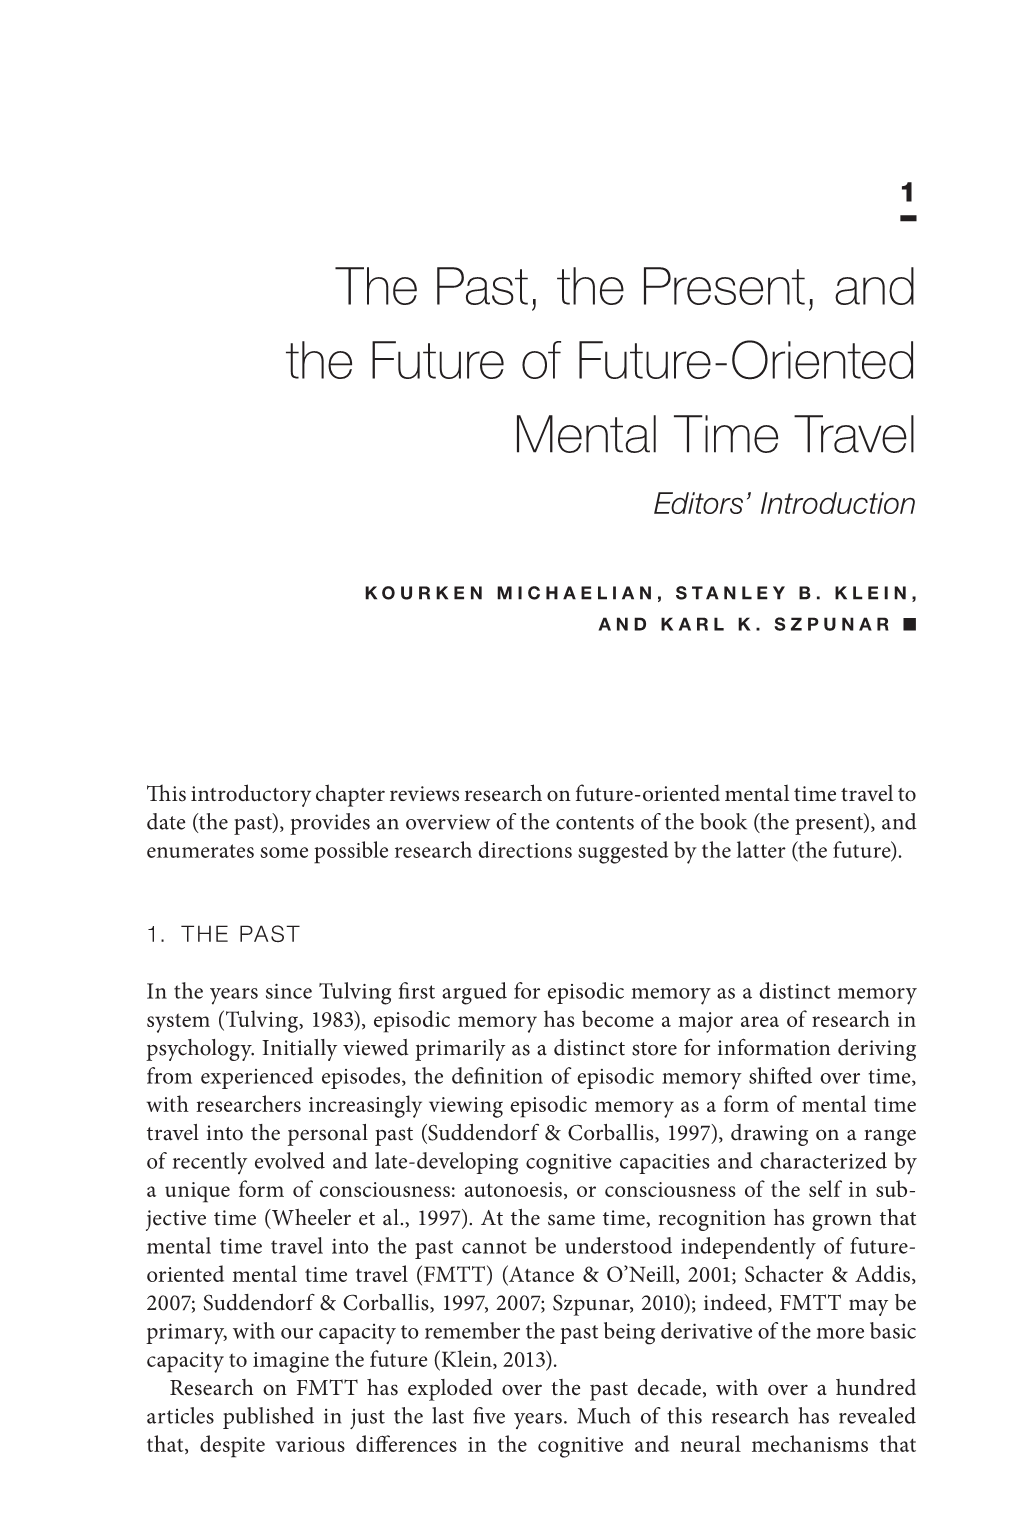 The Past, the Present, and the Future of Future- Oriented Mental Time Travel